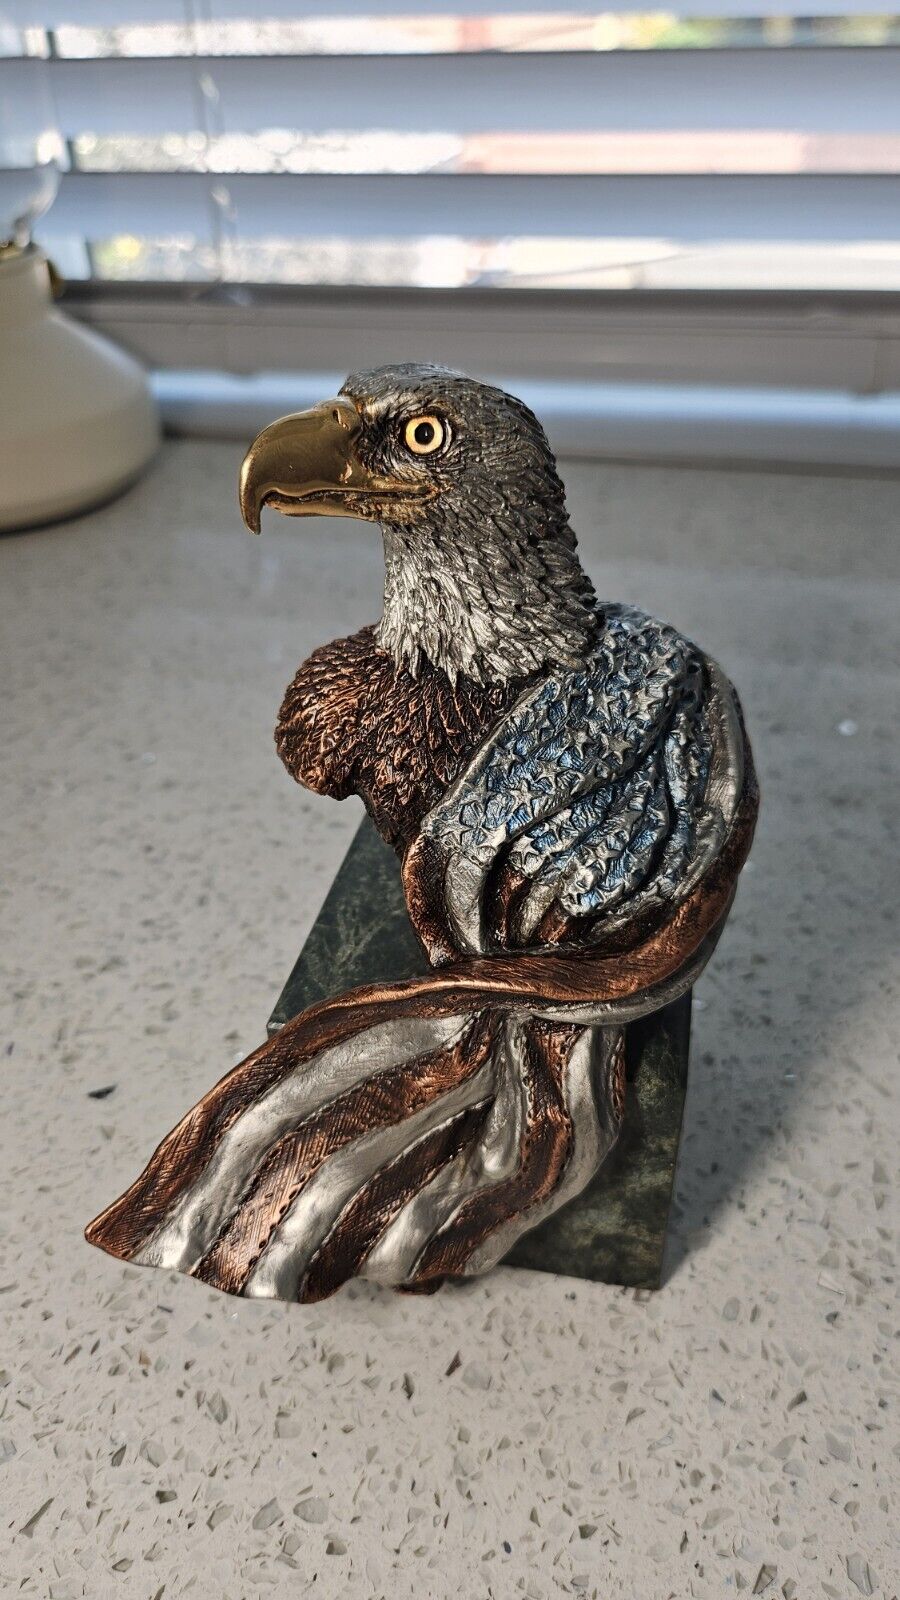 KITTY CANTRELL EAGLE Sculpture Liberty 1993 by Gorham Low Edition # 150/2500